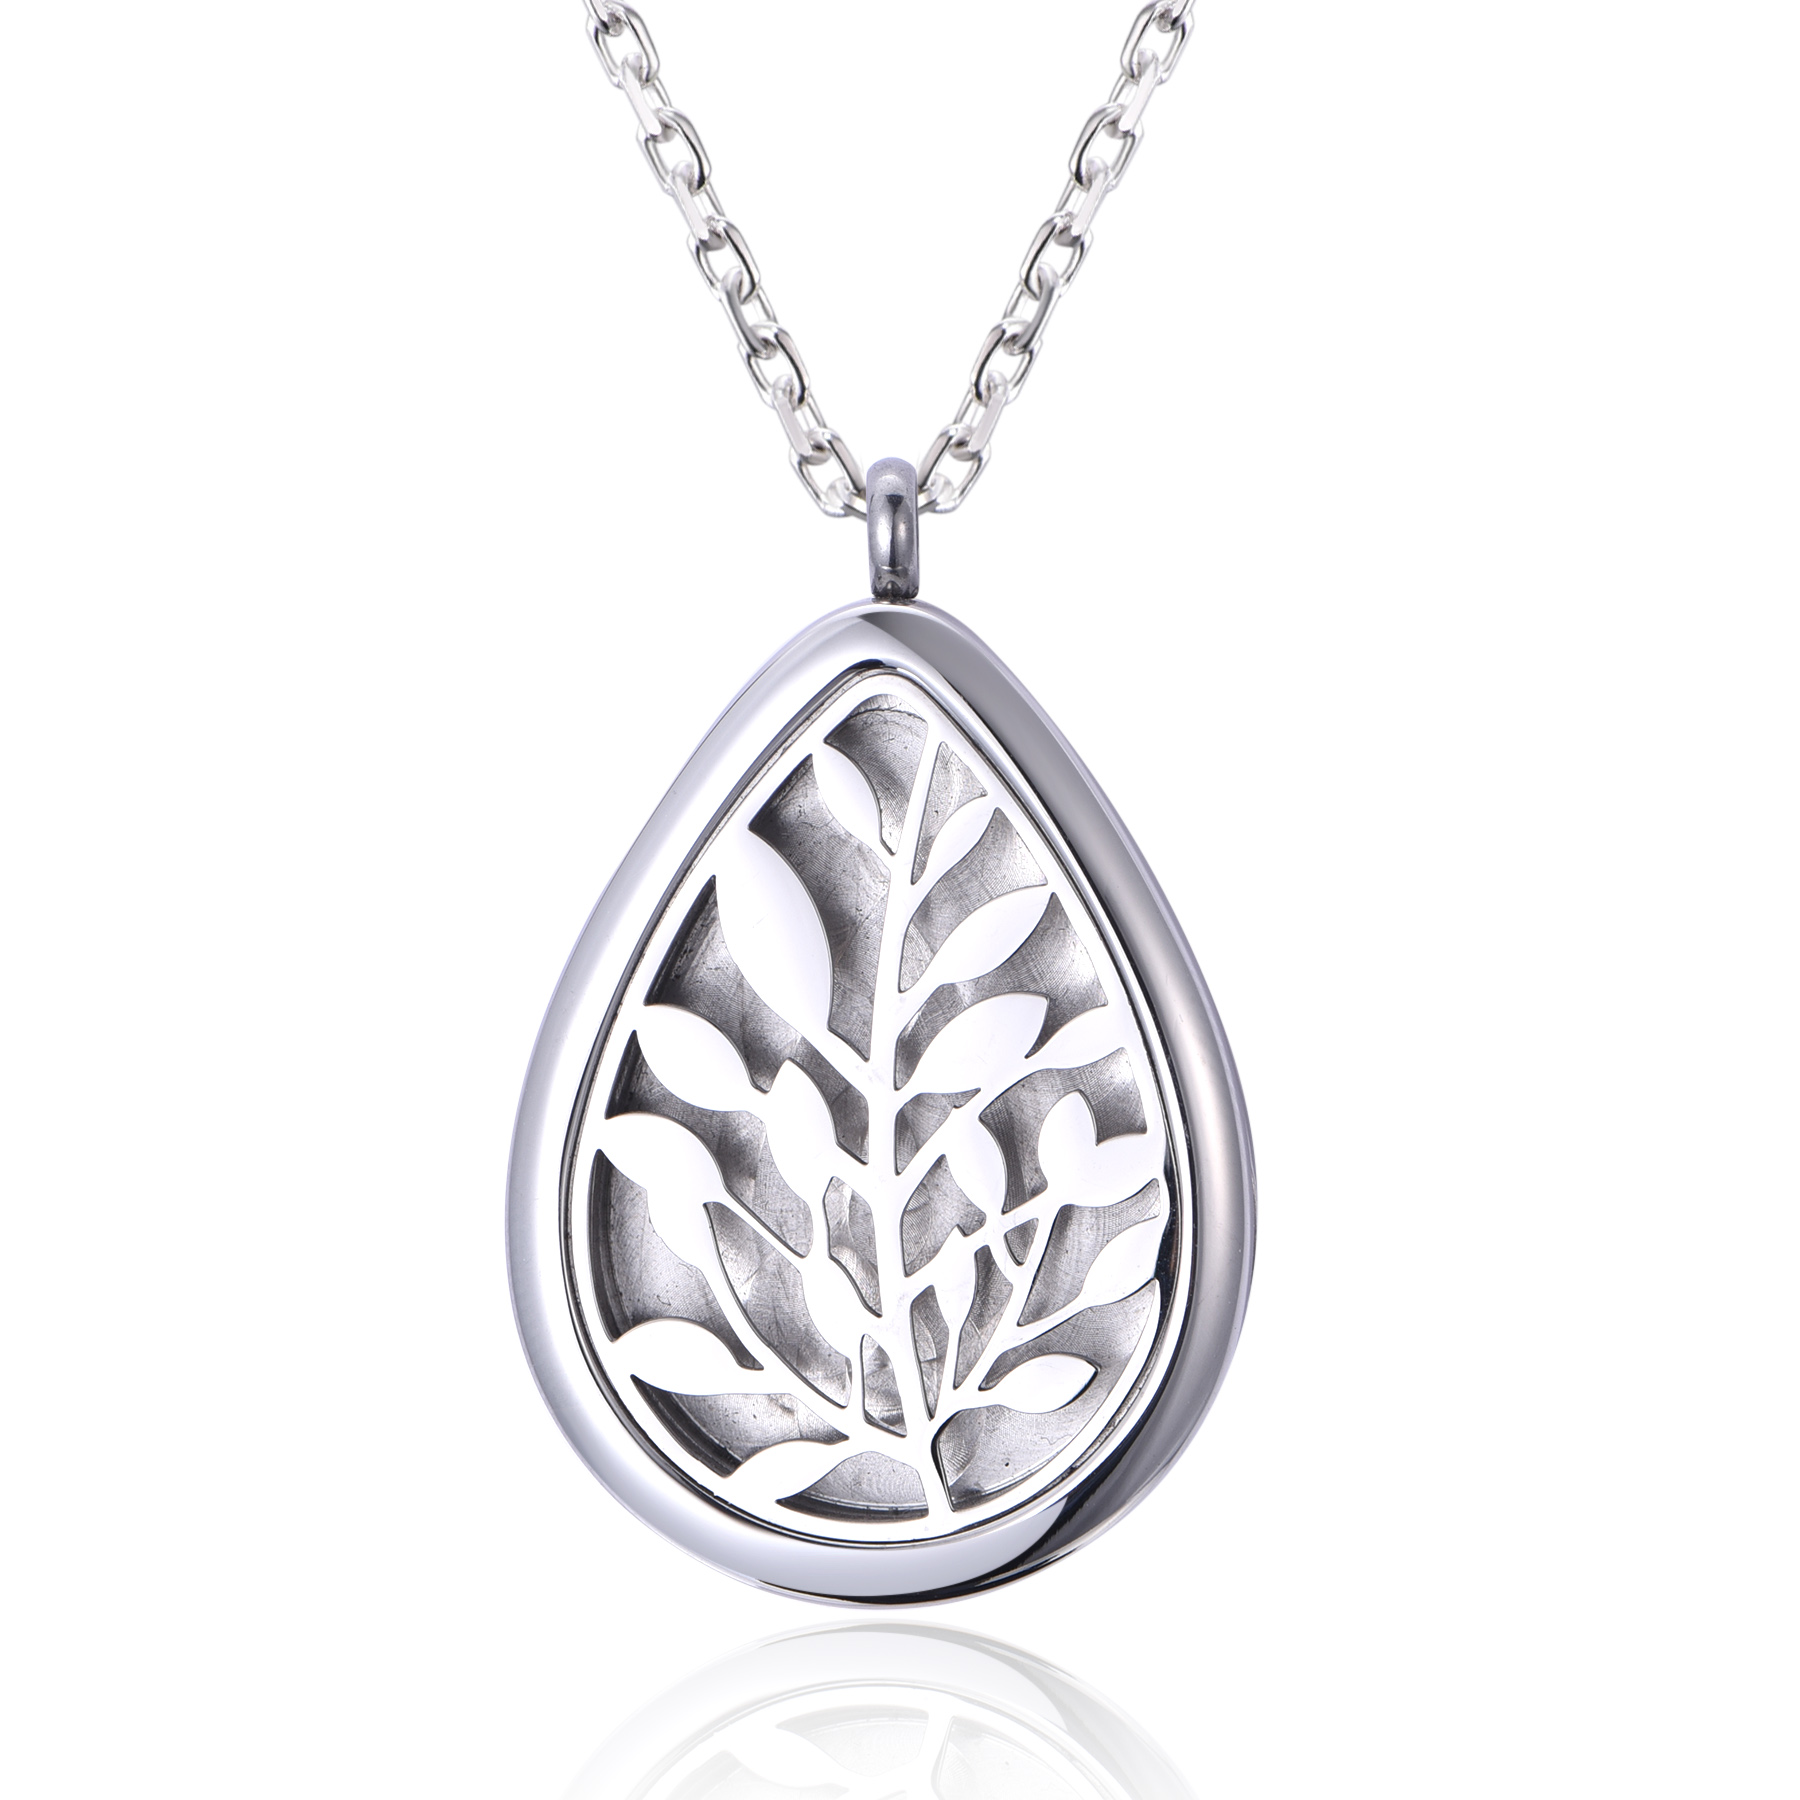 Fashion Drop Shape Locket Stainless Steel Perfume Diffuse Pendant Necklace NS10-01